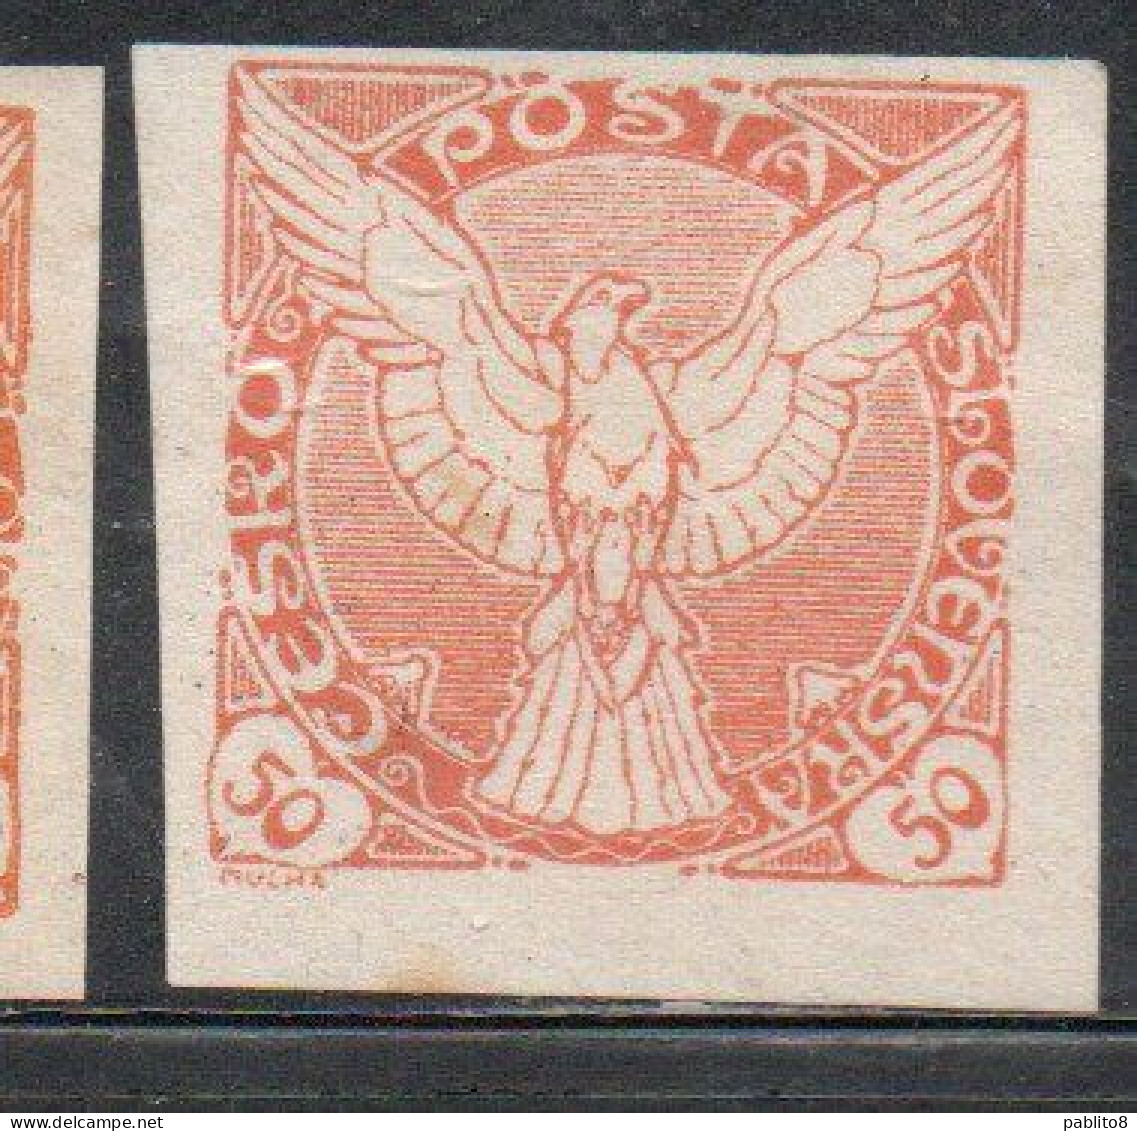 CZECHOSLOVAKIA CESKA CECOSLOVACCHIA 1918 1920 IMPERF. NEWSPAPER STAMPS WINDHOVER 50h MH - Newspaper Stamps